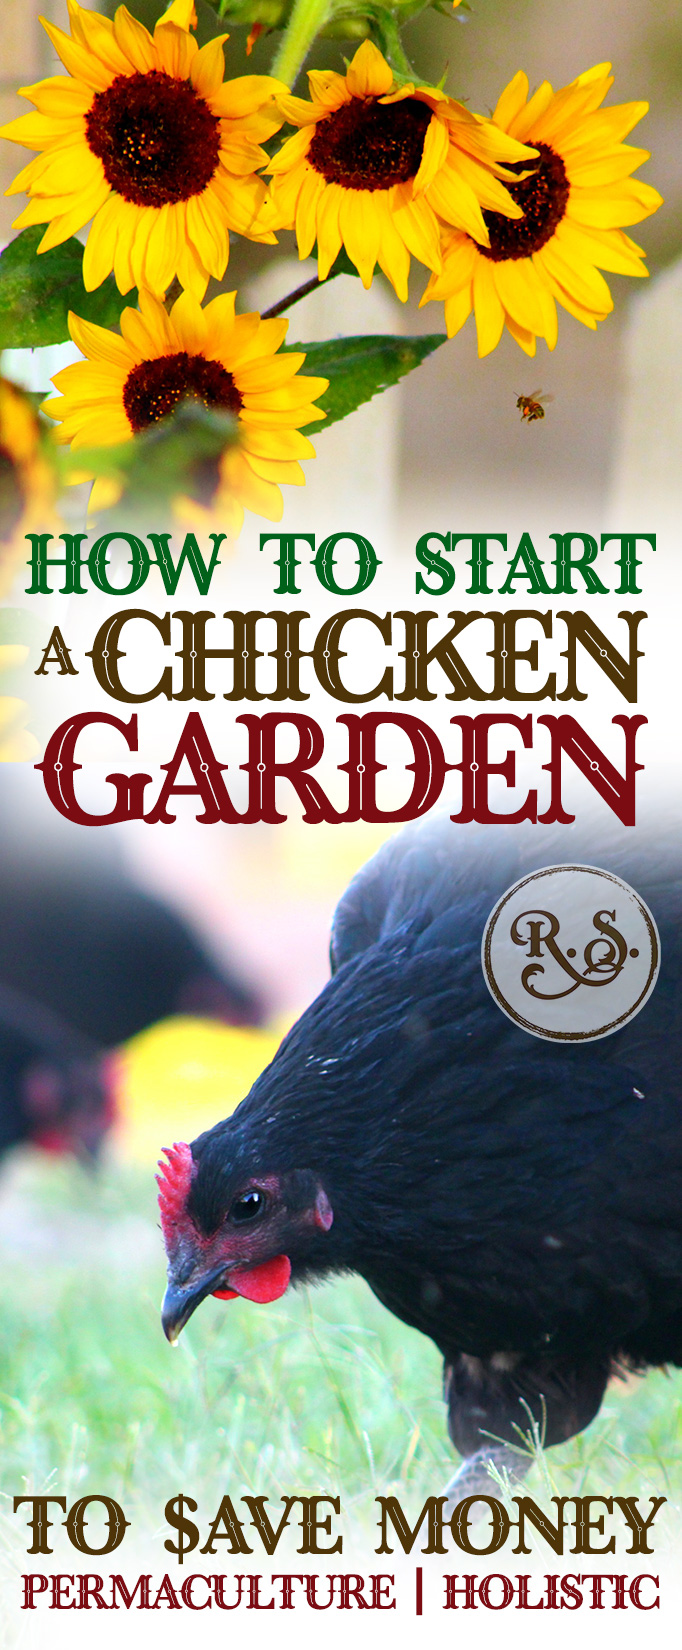 Learn how to grow a sustainable garden for your backyard chickens to save money on their feed bill. Plant shrubs, trees & herbs for a permaculture homestead. Great DIY ideas for beginners & beyond.